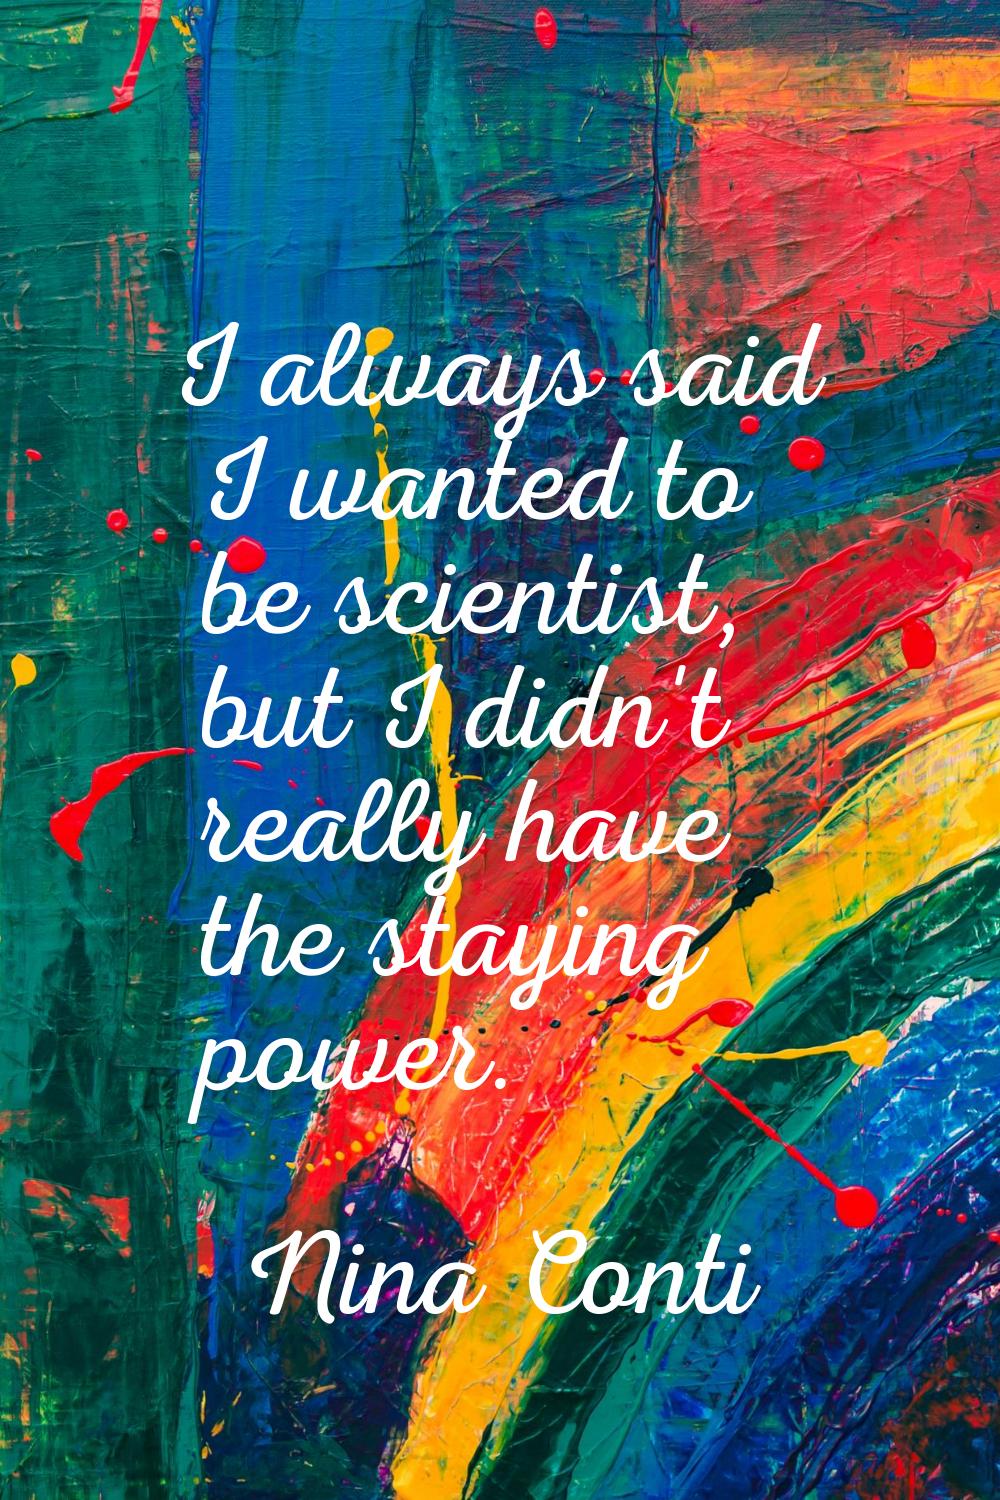 I always said I wanted to be scientist, but I didn't really have the staying power.